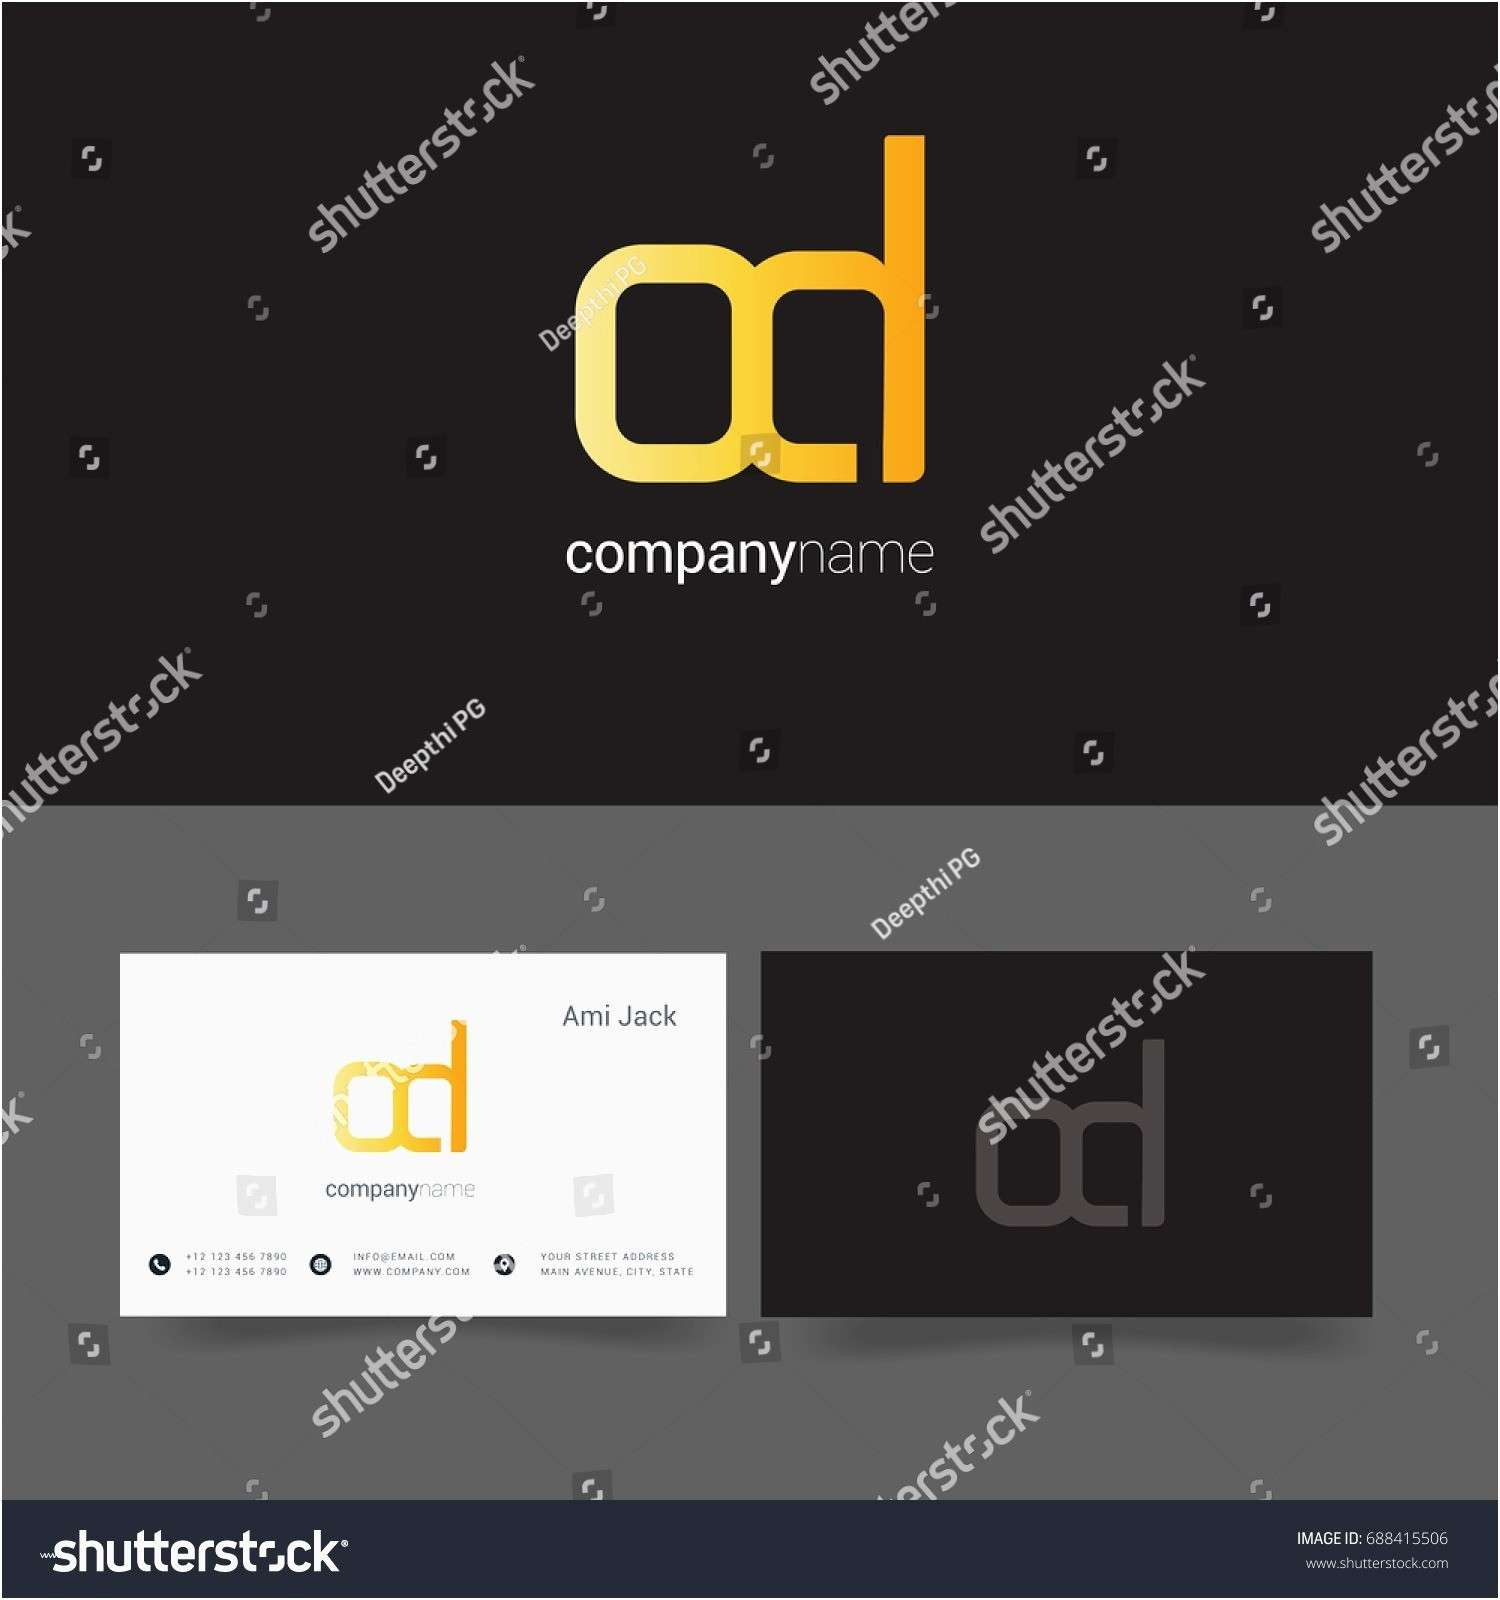 Business Cards Template Free Caquetapositivo Of Free-business-card-templates.com